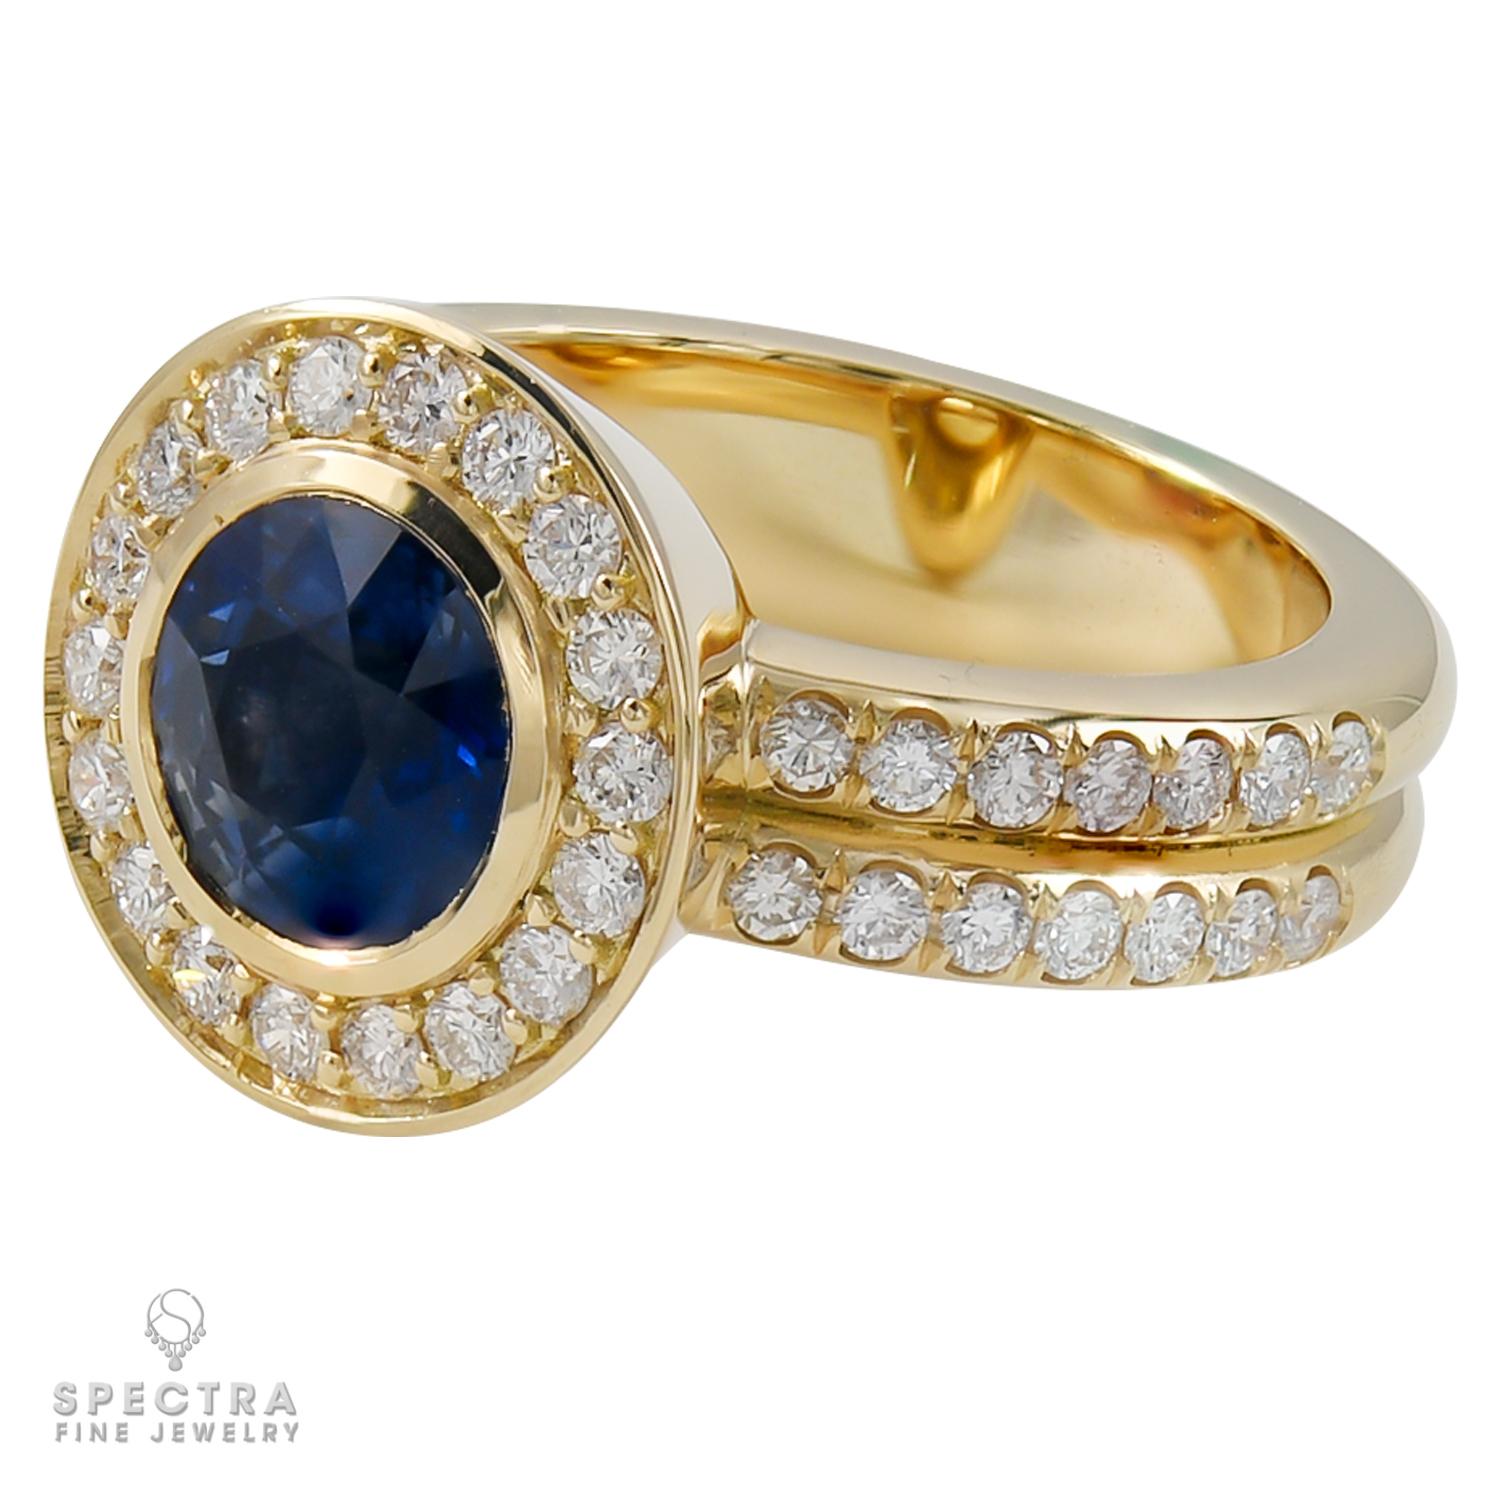 A beautiful ring comprising of a round blue sapphire set in a halo of pave diamonds. 
A double band with pave diamonds set half way. 
Weight of the sapphire is approximately 2 carats.
Total weight of diamonds is 0.6 carats. 
Metal is 18k yellow